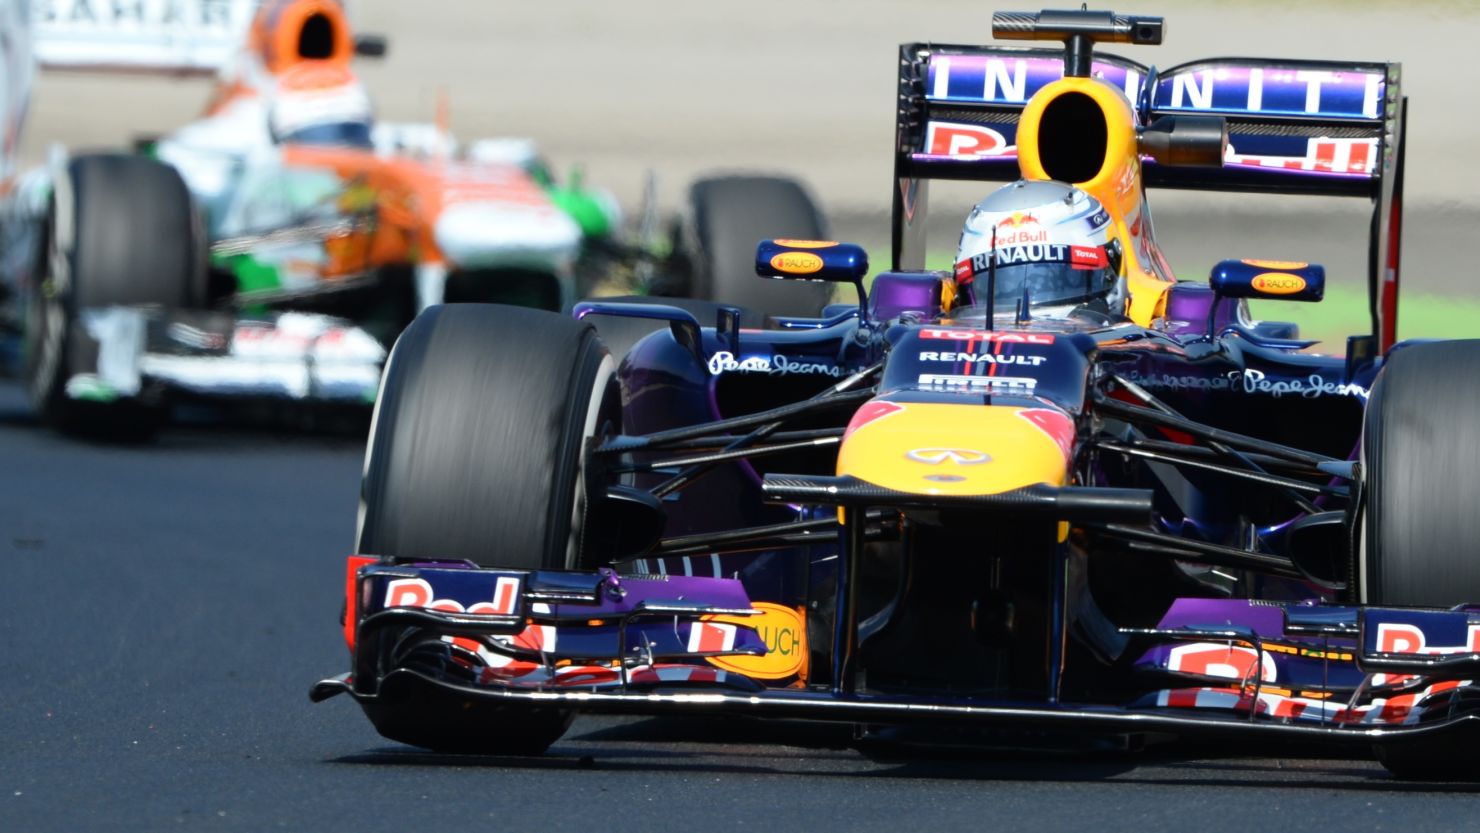 Sebastian Vettel in his Red Bull leads the Force India of Adrian Sutil in practice for the Hungarian Grand Prix. 